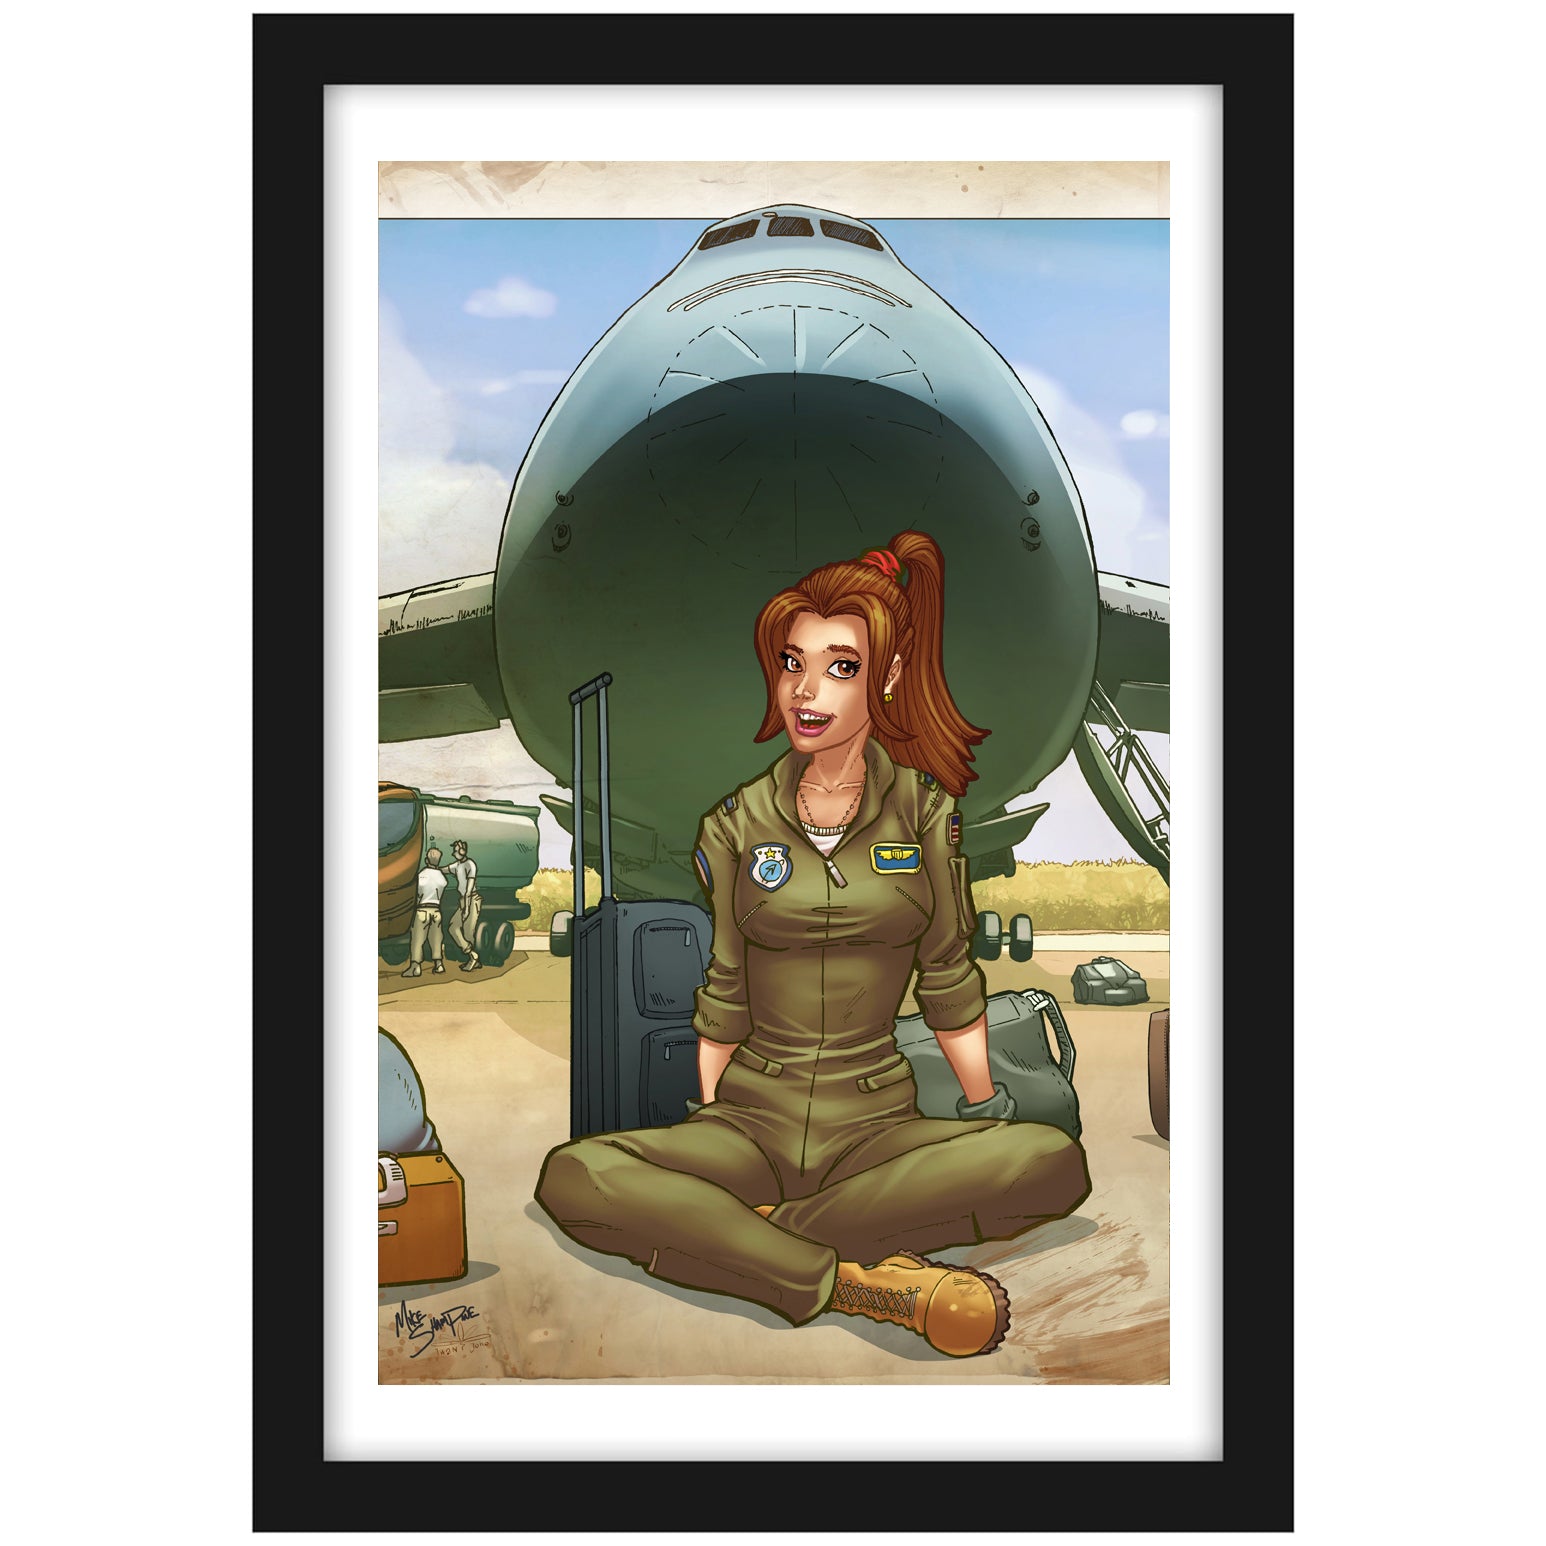 C-5 Galaxy "2 Hour ETIC" - Vintage Print Pinup & Airplane Art by Mike Shampine - Signed and Numbered (2 of 3 print series)